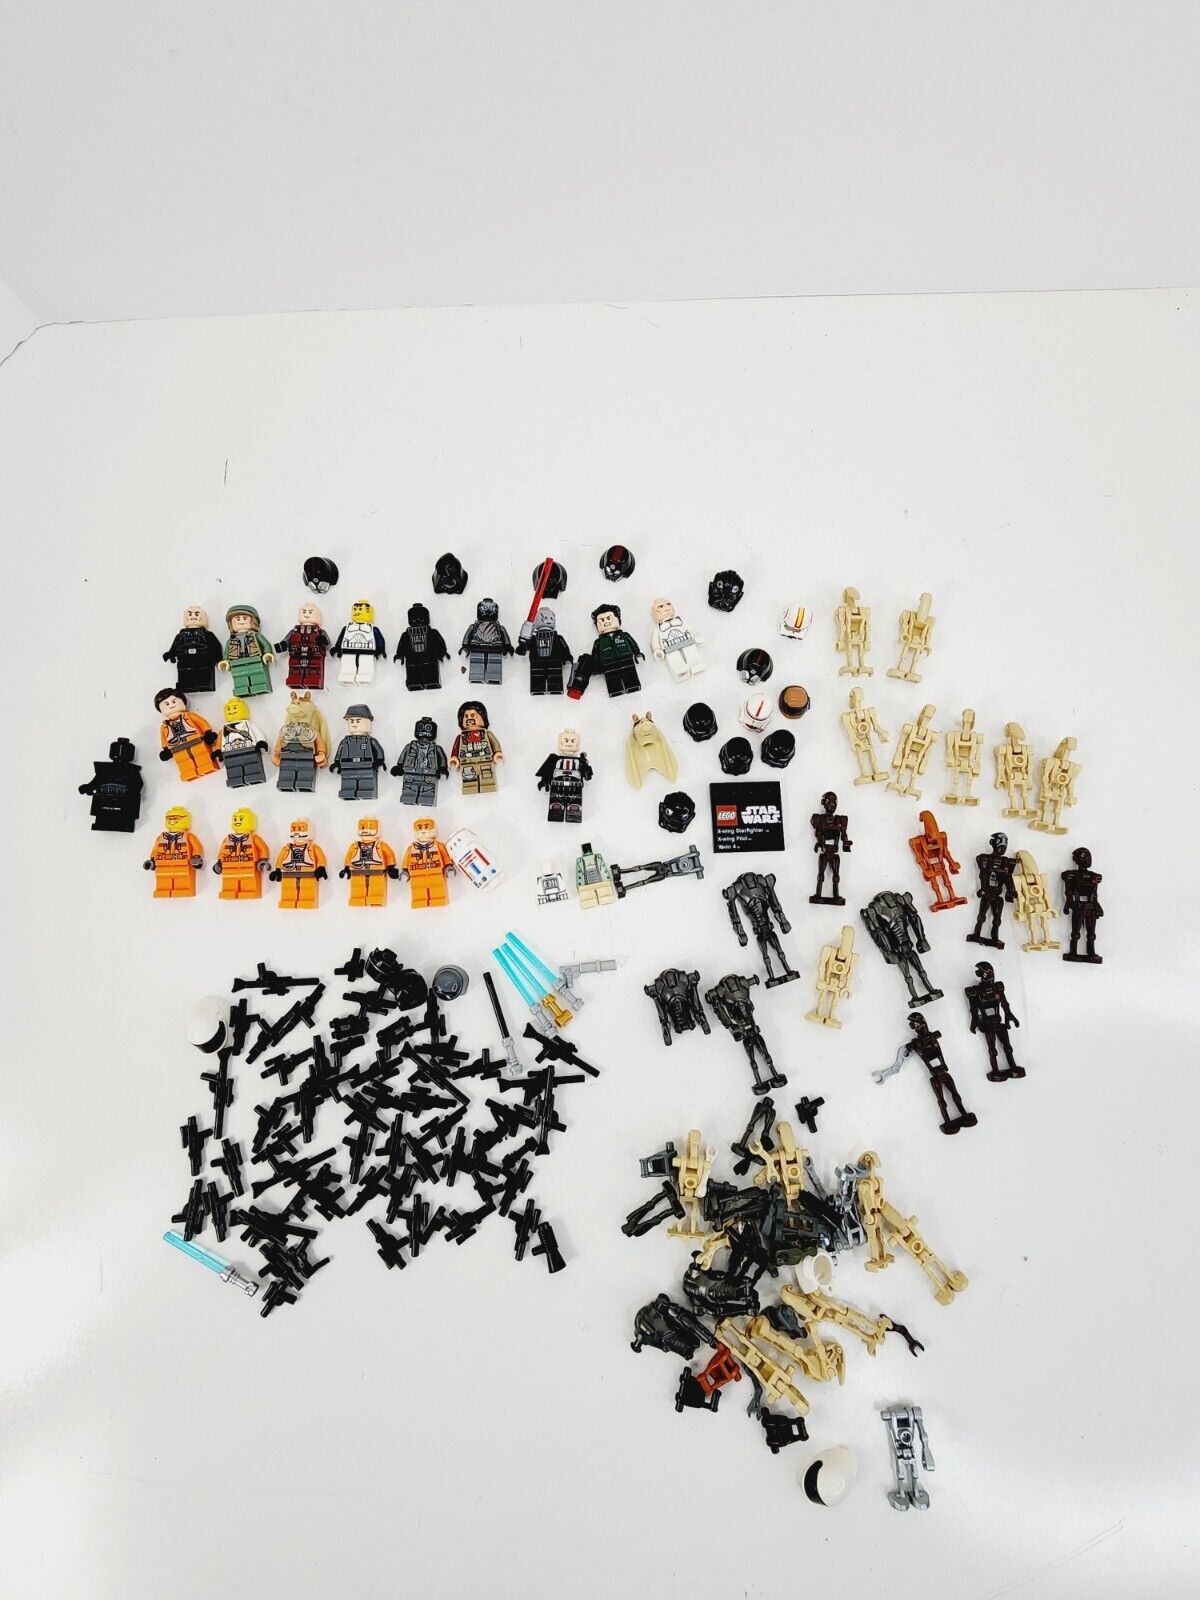 Large Lot Of Lego Star Wars Minifigures Parts And Accessories